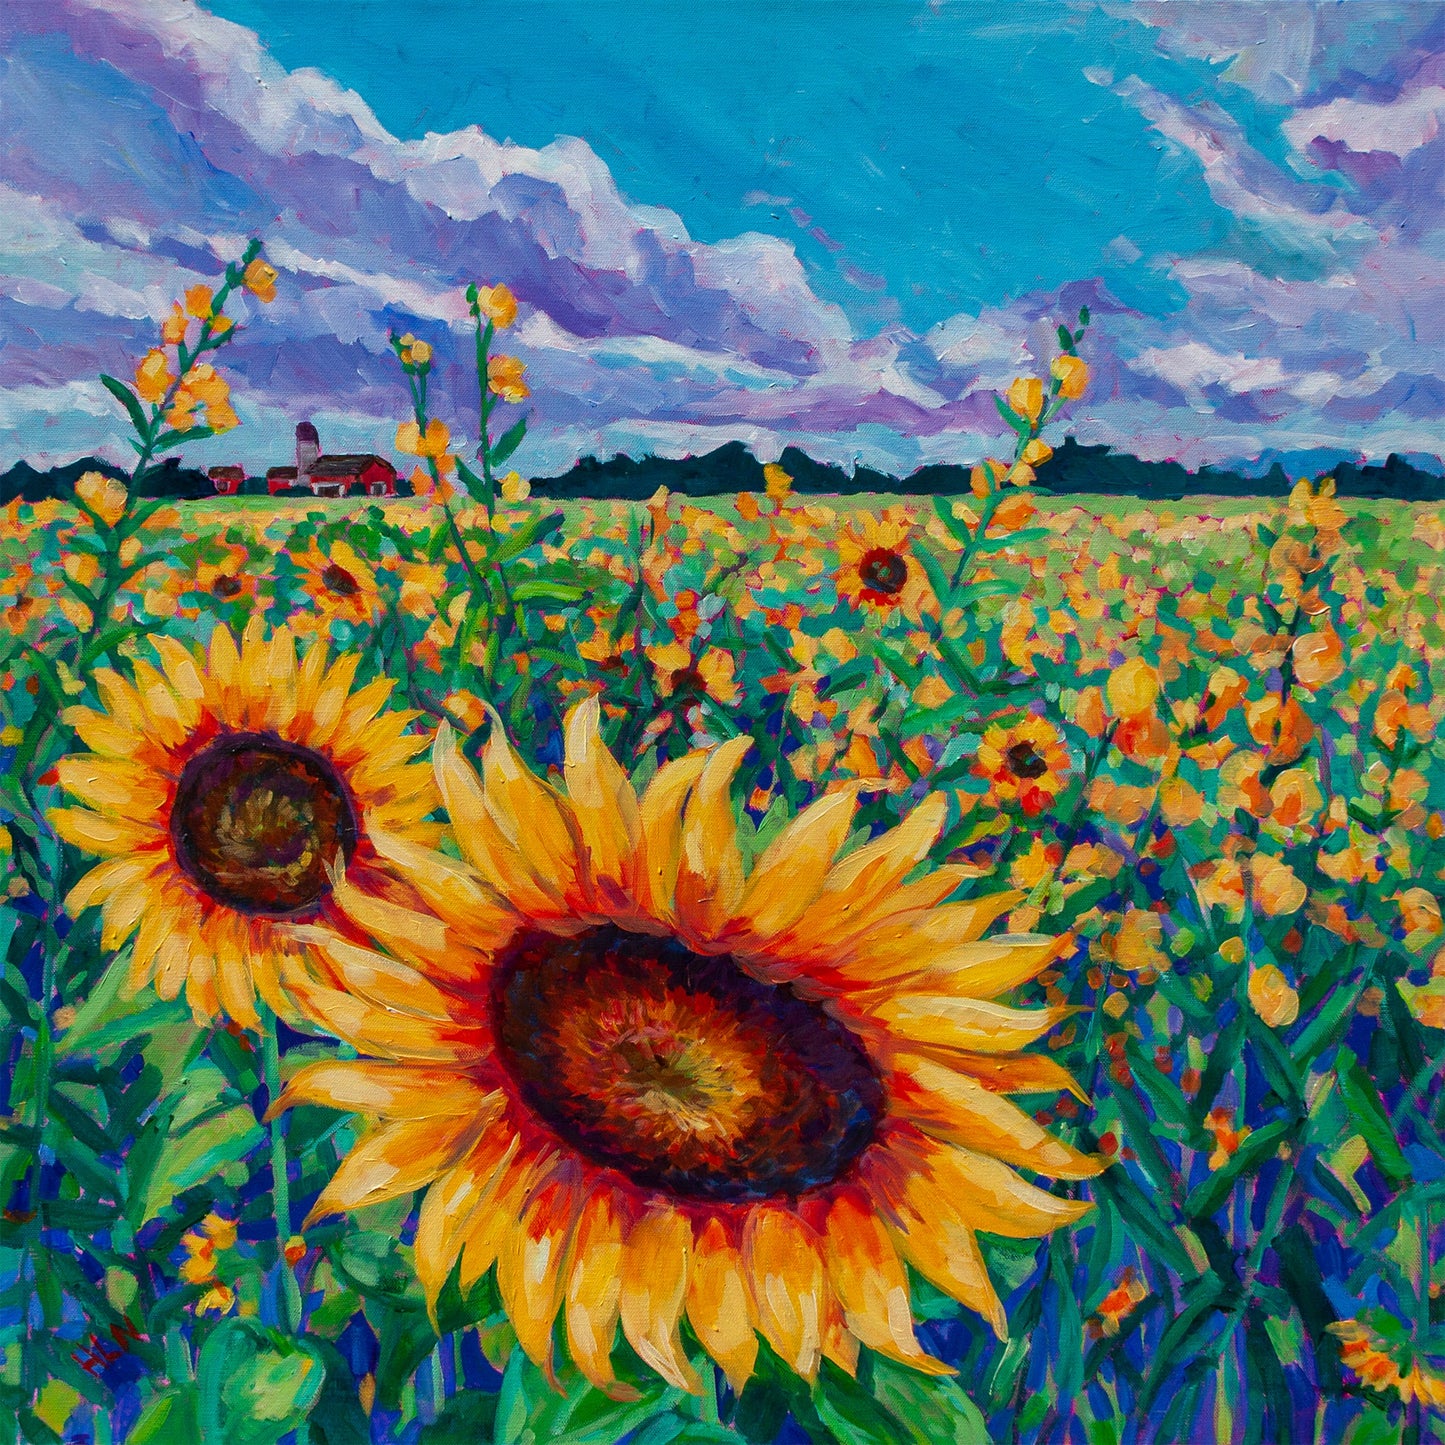 Dramatic sunflower field painting with modern impressionist style